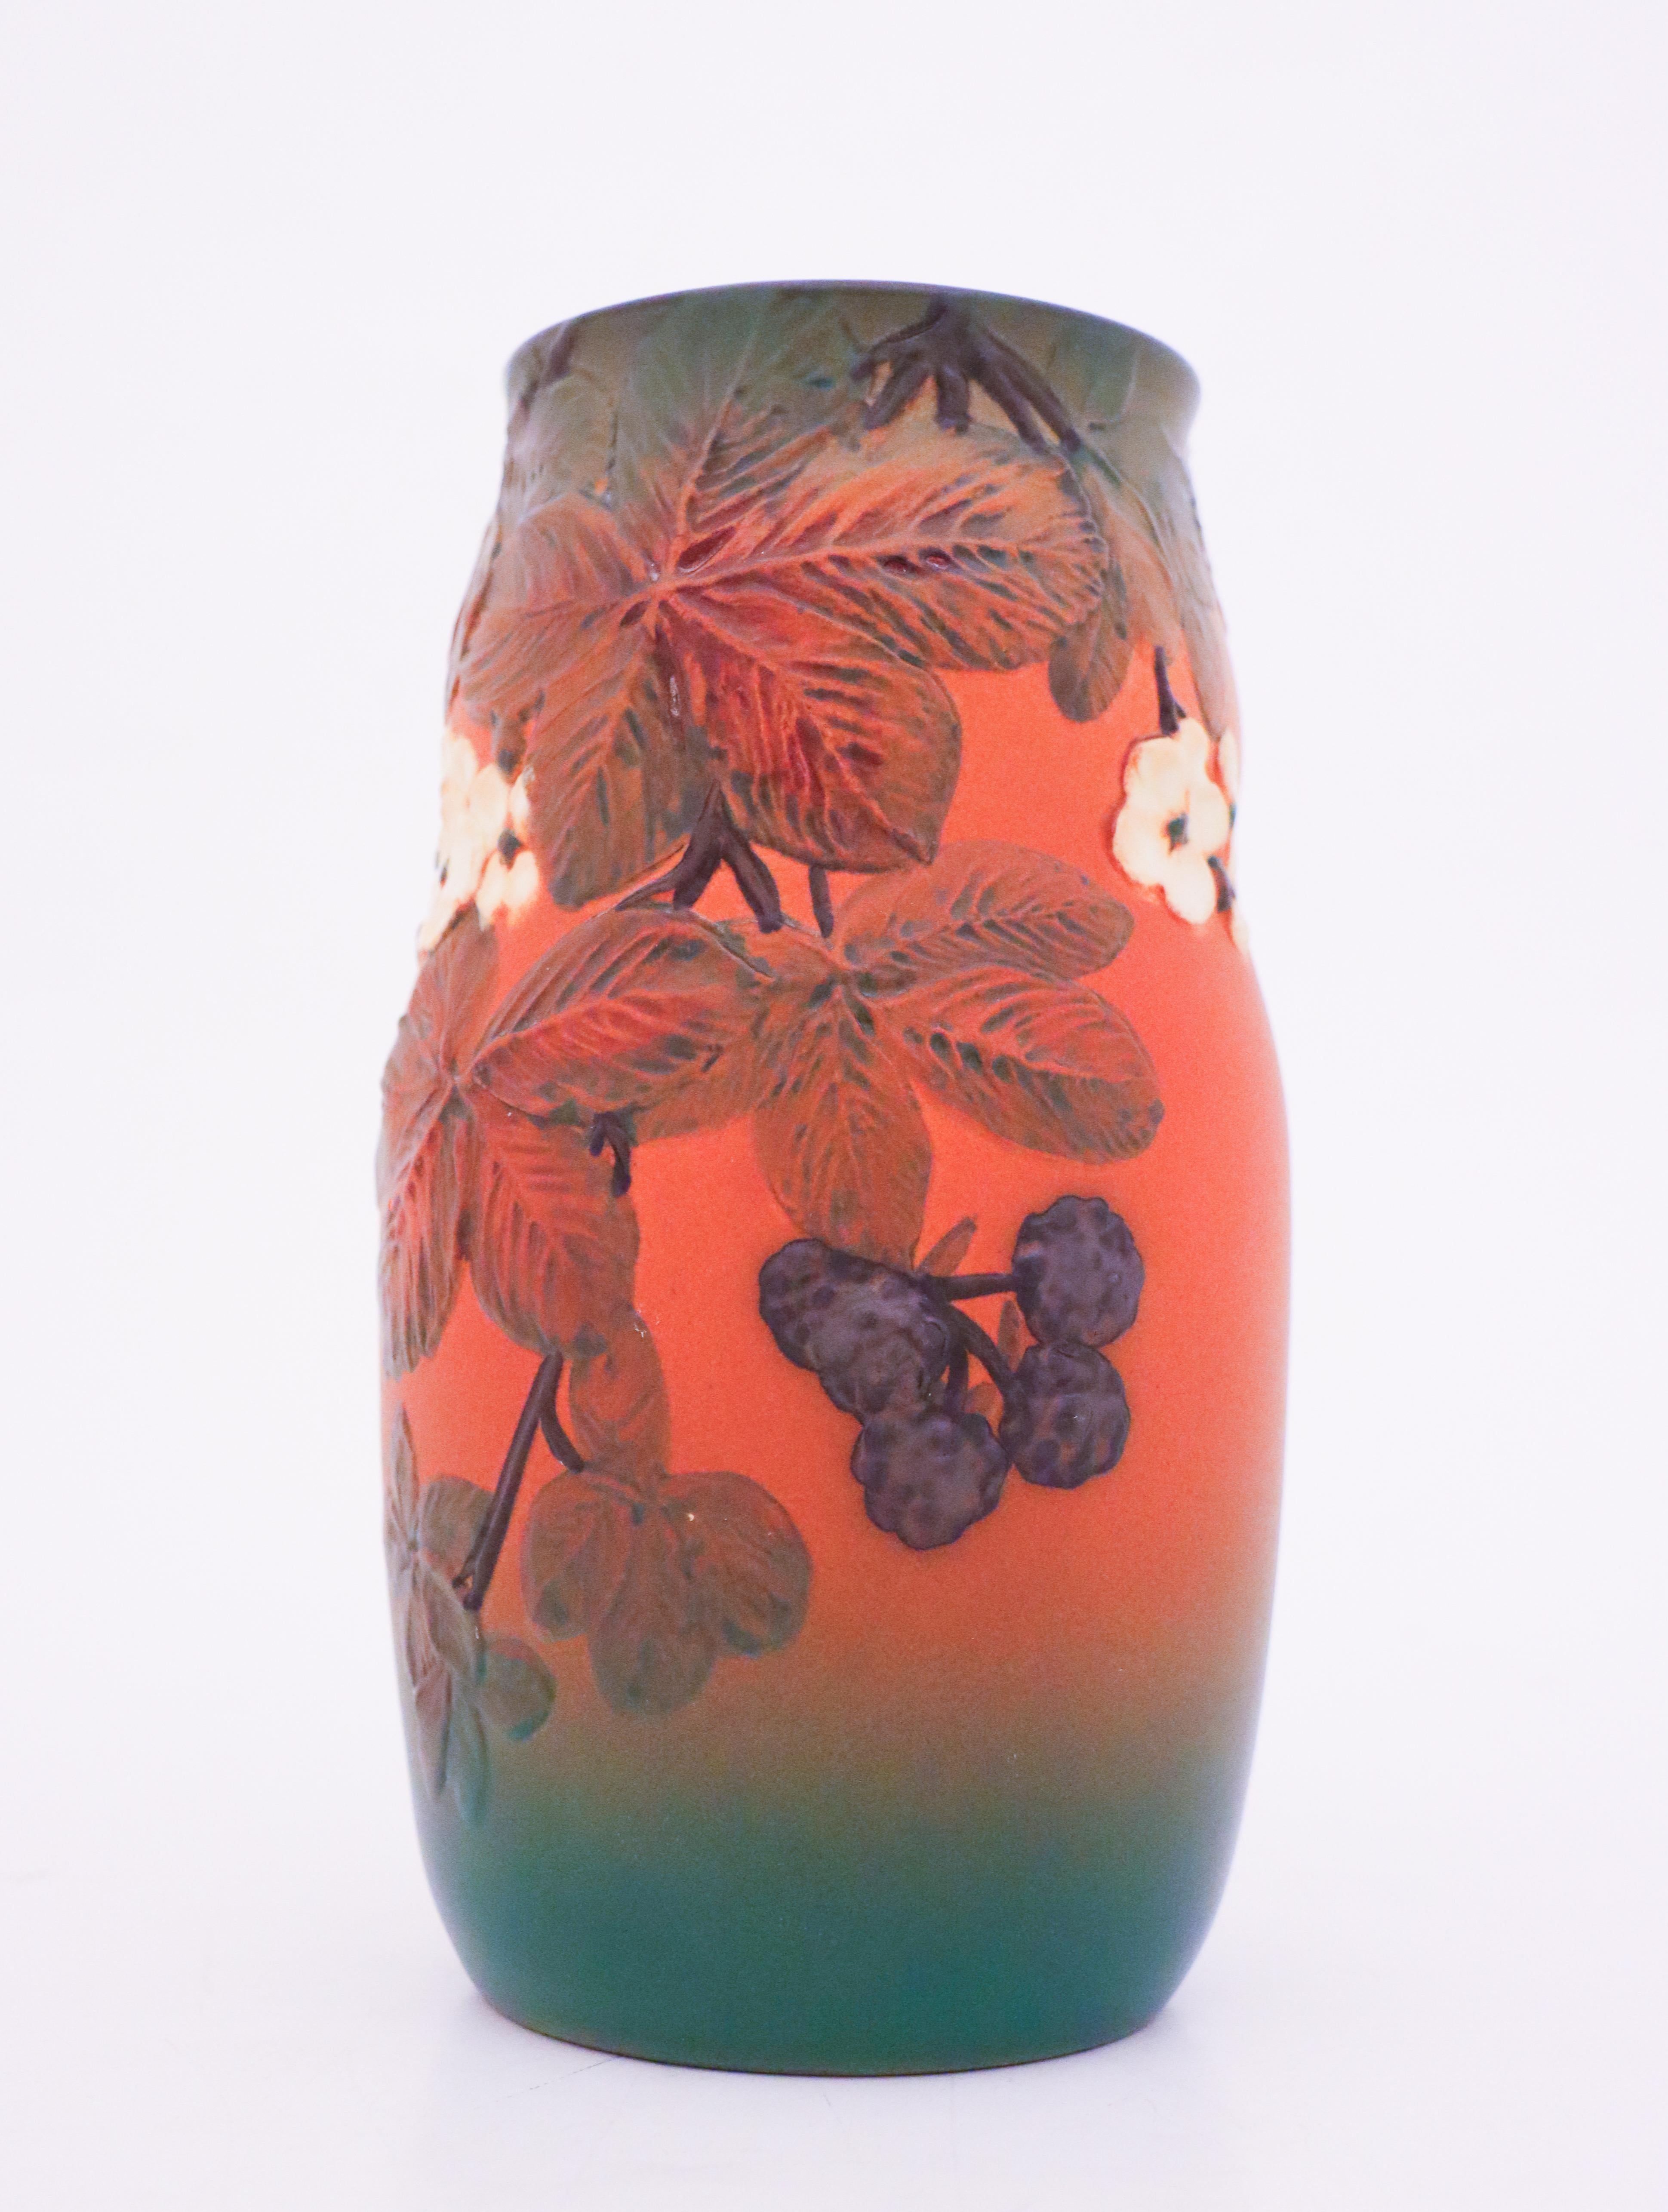 A vase designed by Peter Ipsen Enke in Denmark in the early 20th century in lovely art nouveau style. The vase is 20 cm (8